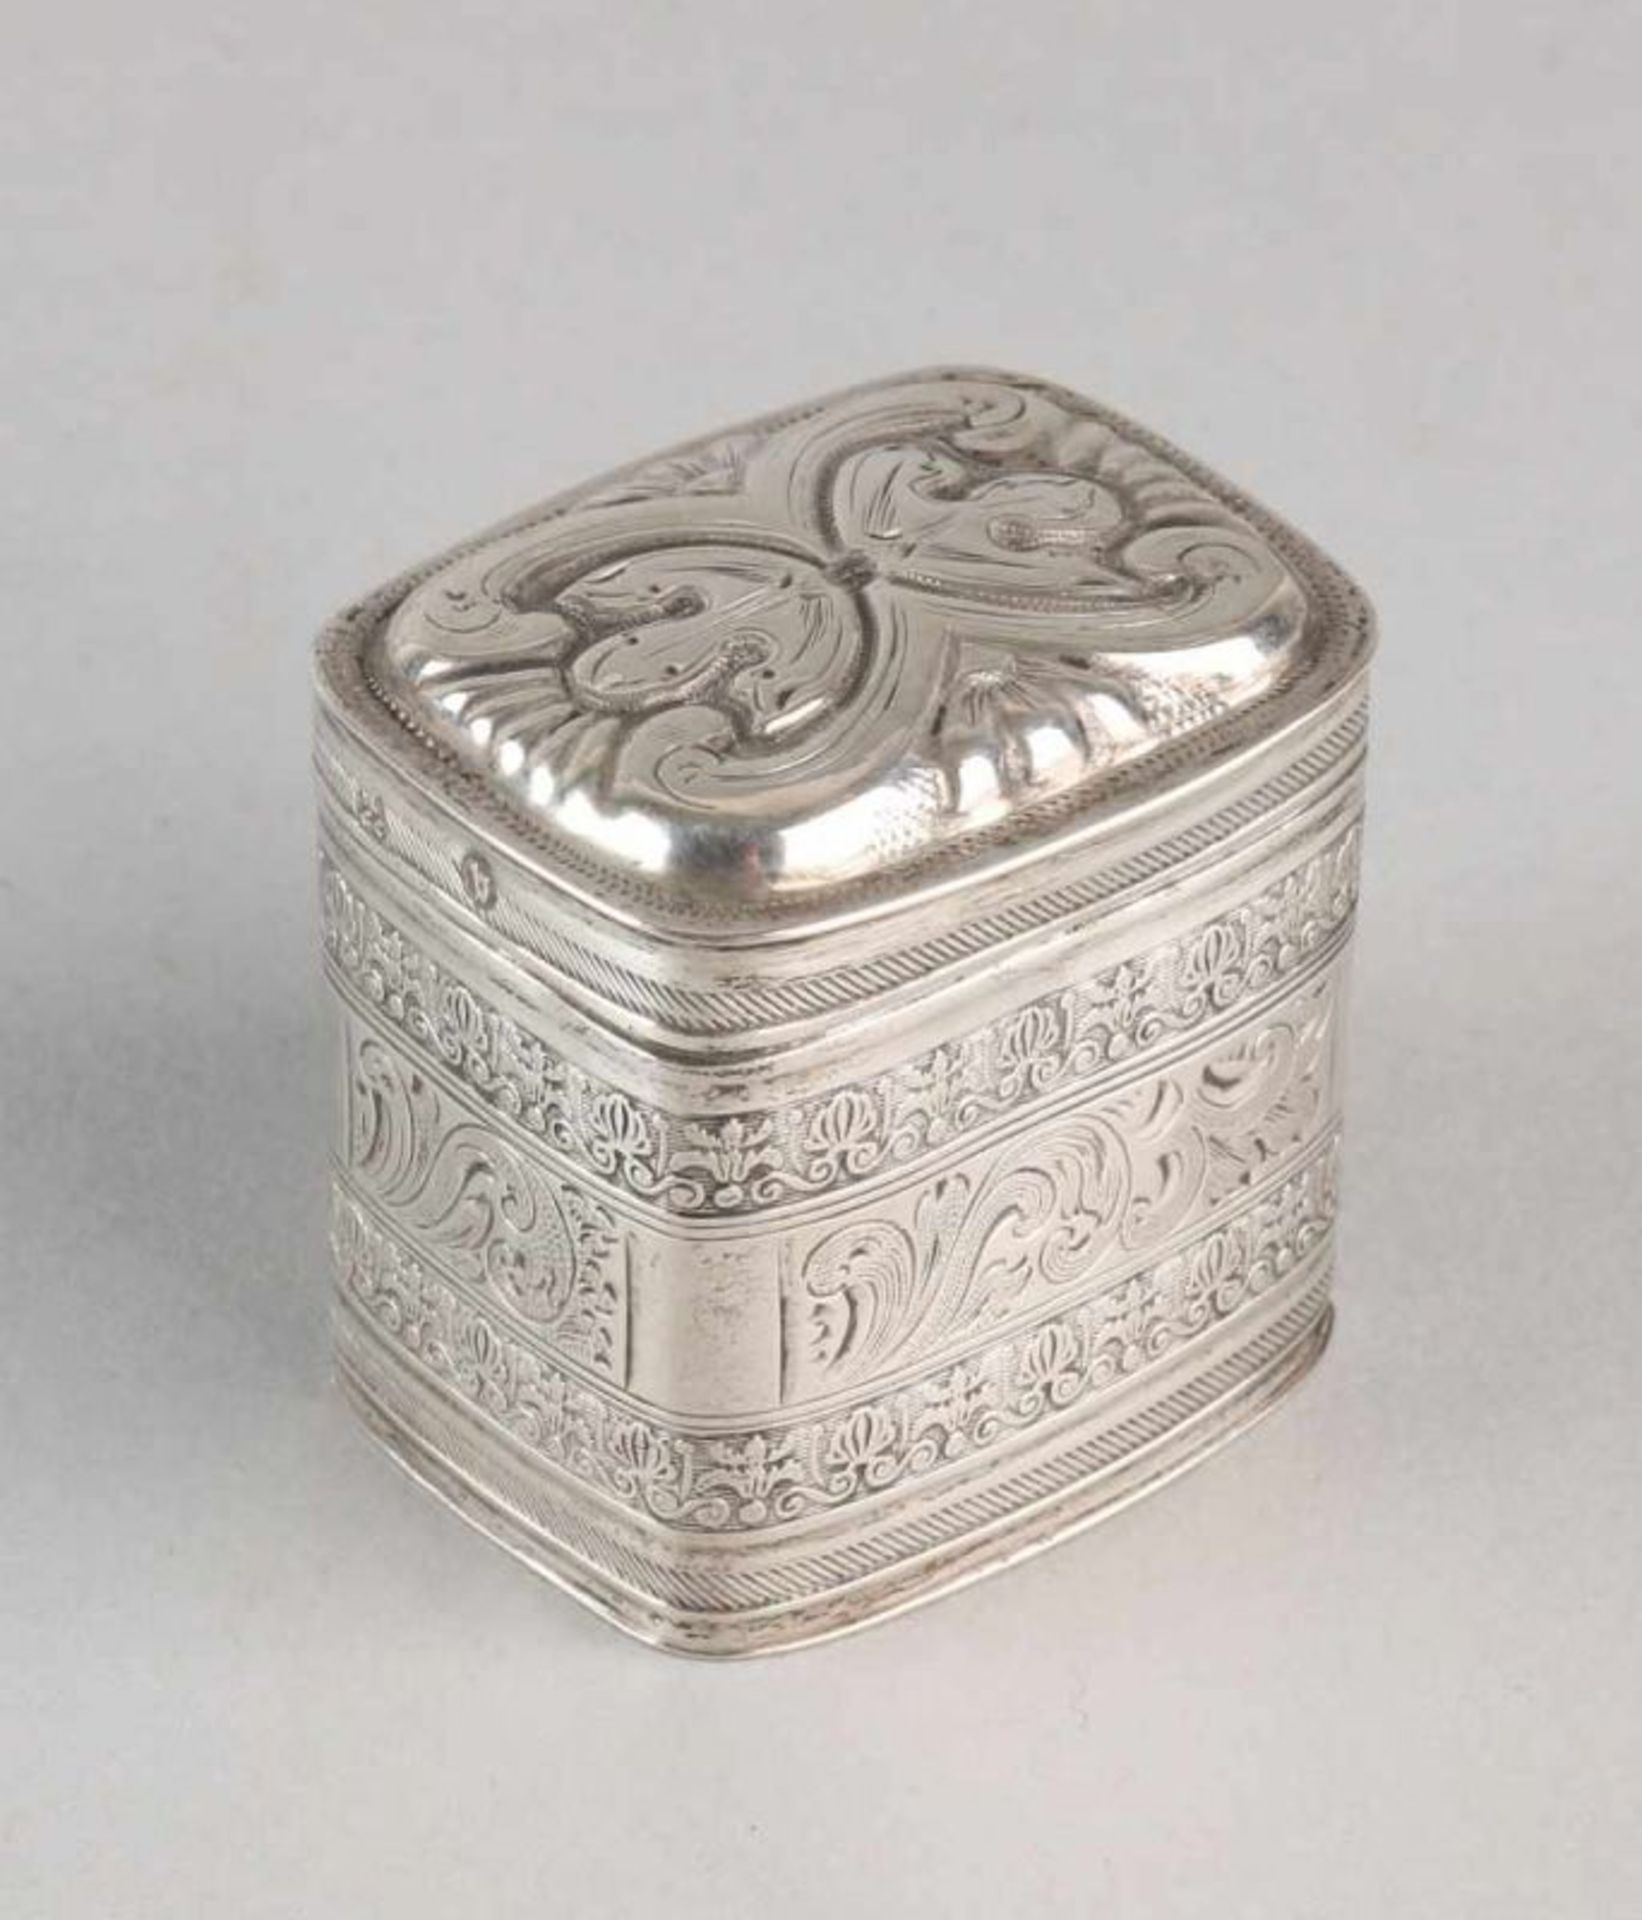 Antique silver 835/000 loderein box with floral decor jobs, Biedermeier engravings and raised lid. A